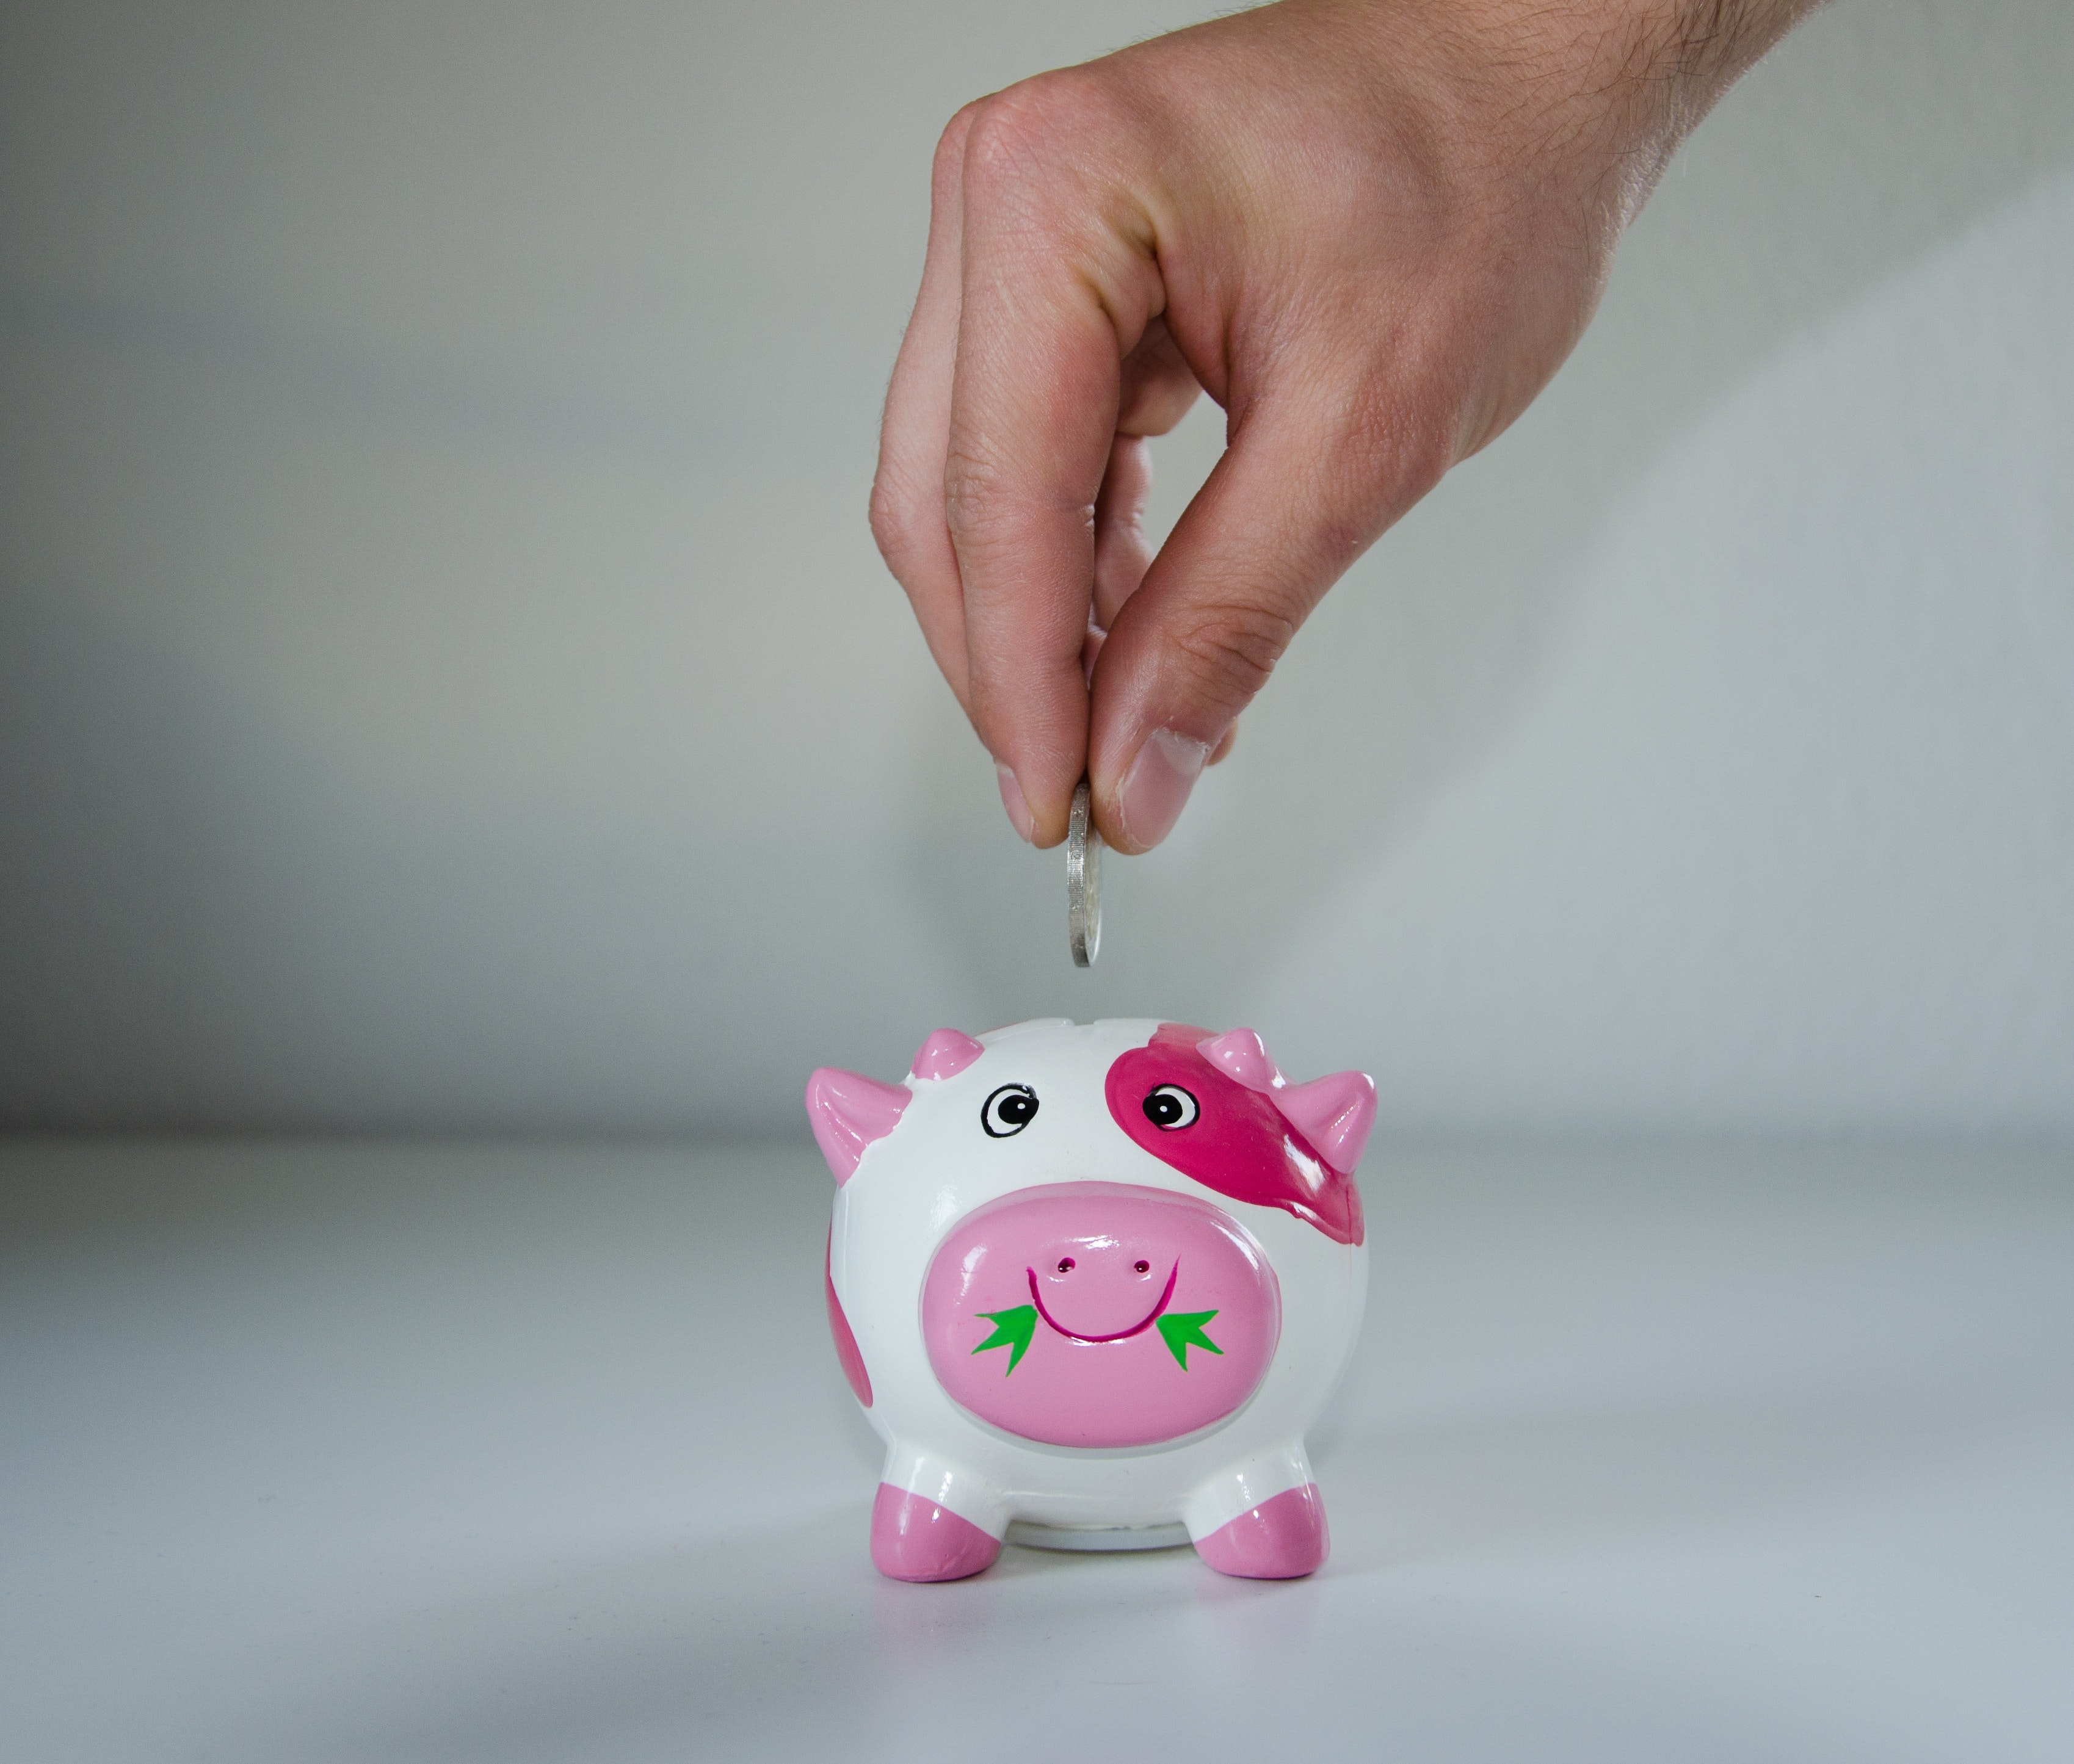 Pink and White Ceramic Pig Coin Bank, Coin, Hand, Money, Save, HQ Photo